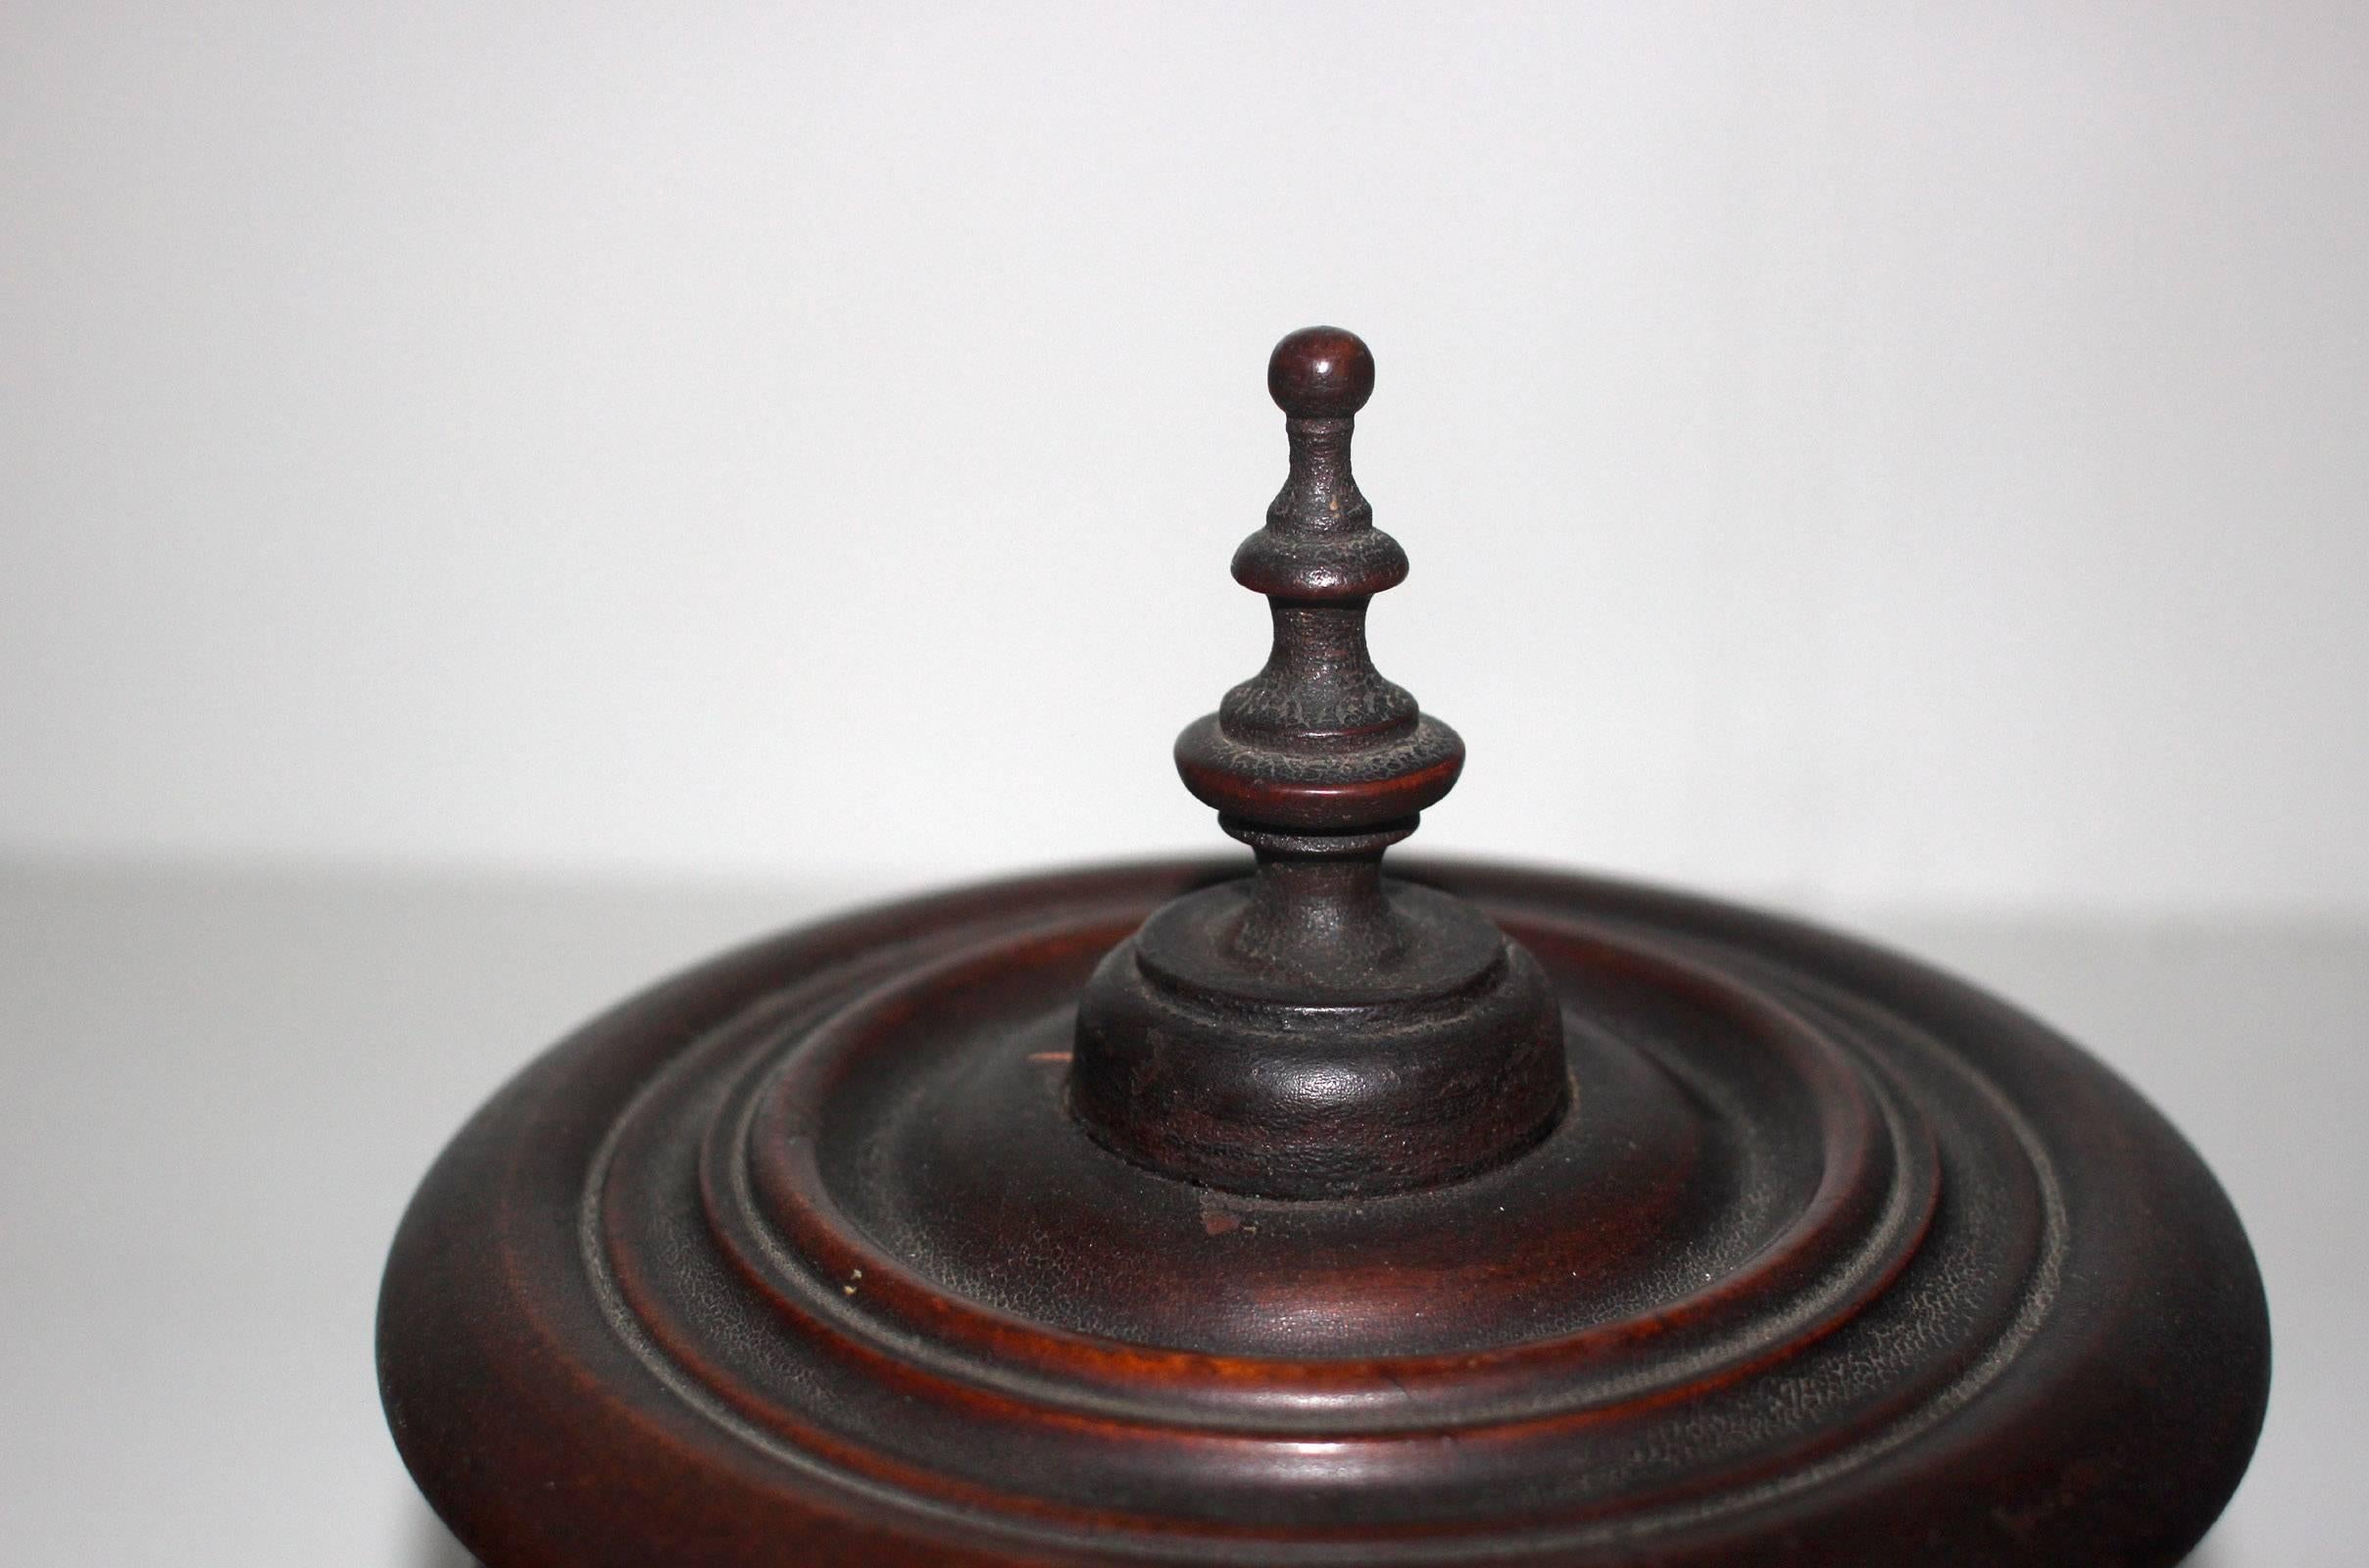 Skill in the needle arts was highly important for the great majority of women in the 19th century. Tools and objects that supported their craft held significance as well. This fine, turned mahogany spool holder contains spindles for ten spools, with